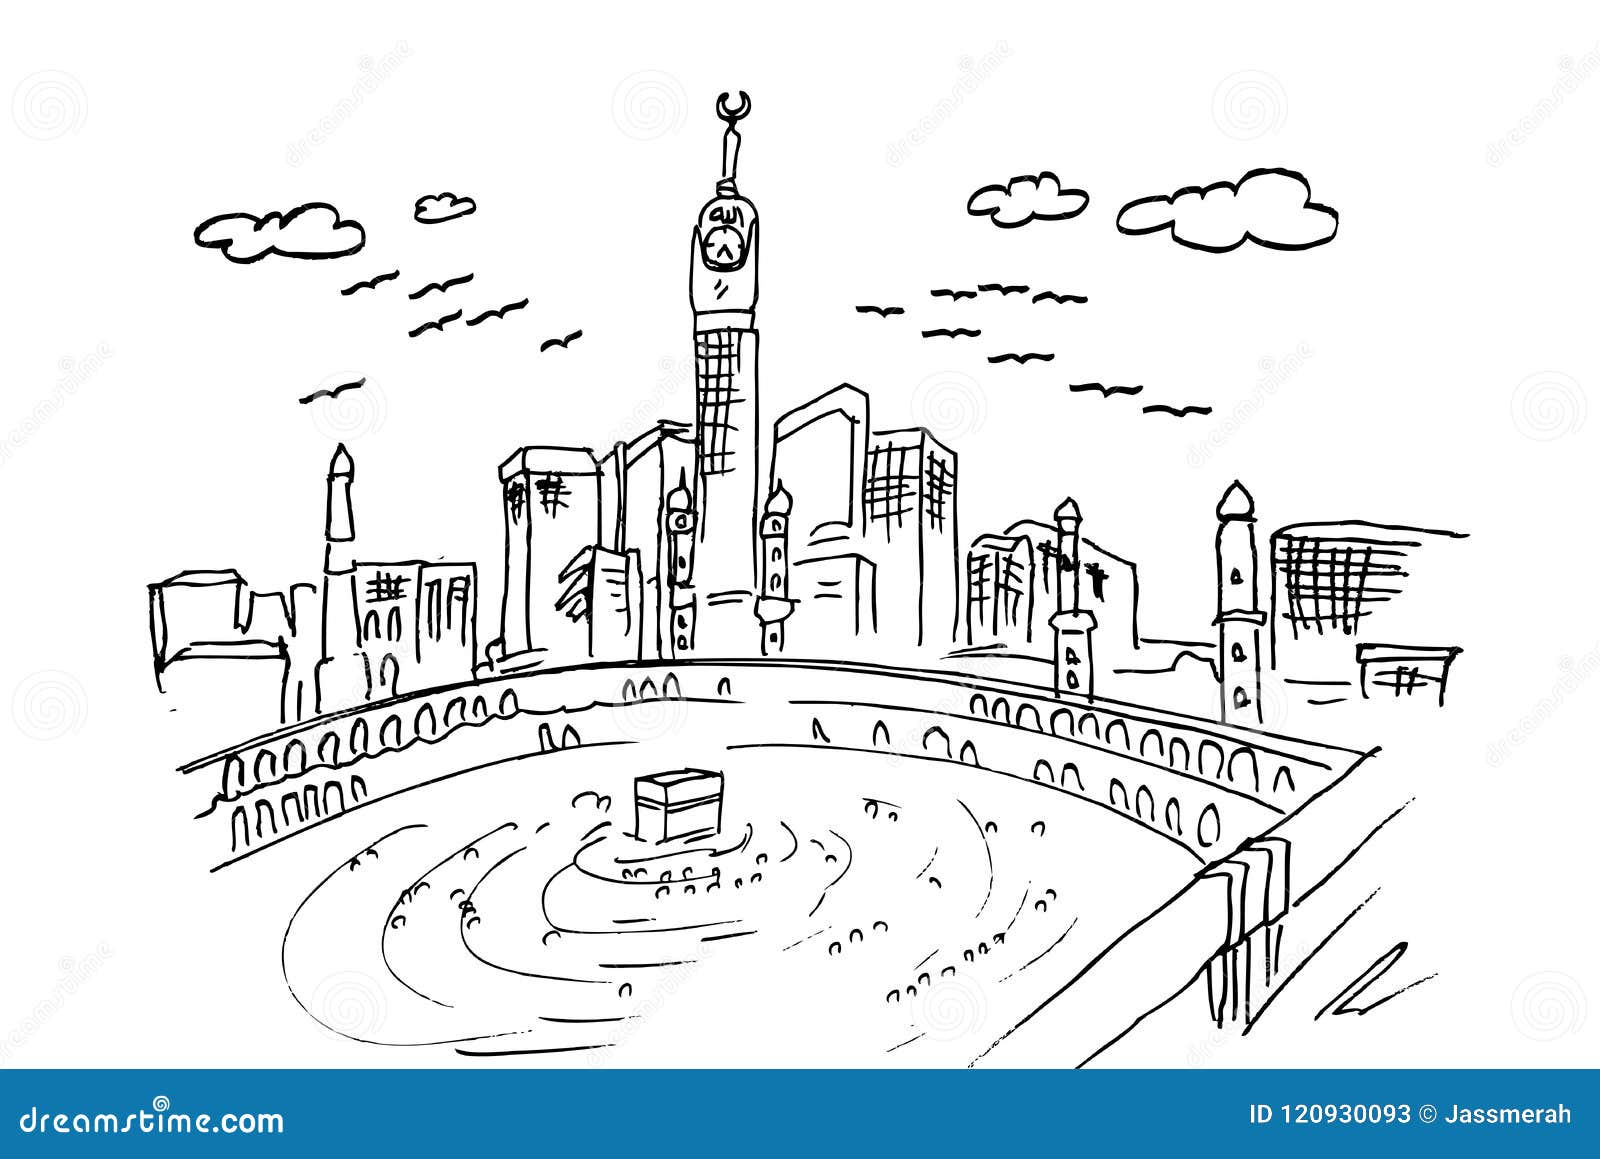 Single continuous line drawing Masjidil Haram landmark Most holy place in  Mecca Saudi Arabia Religious hajj and umrah travel wall decor art  concept Dynamic one line draw design vector illustration 5218697 Vector